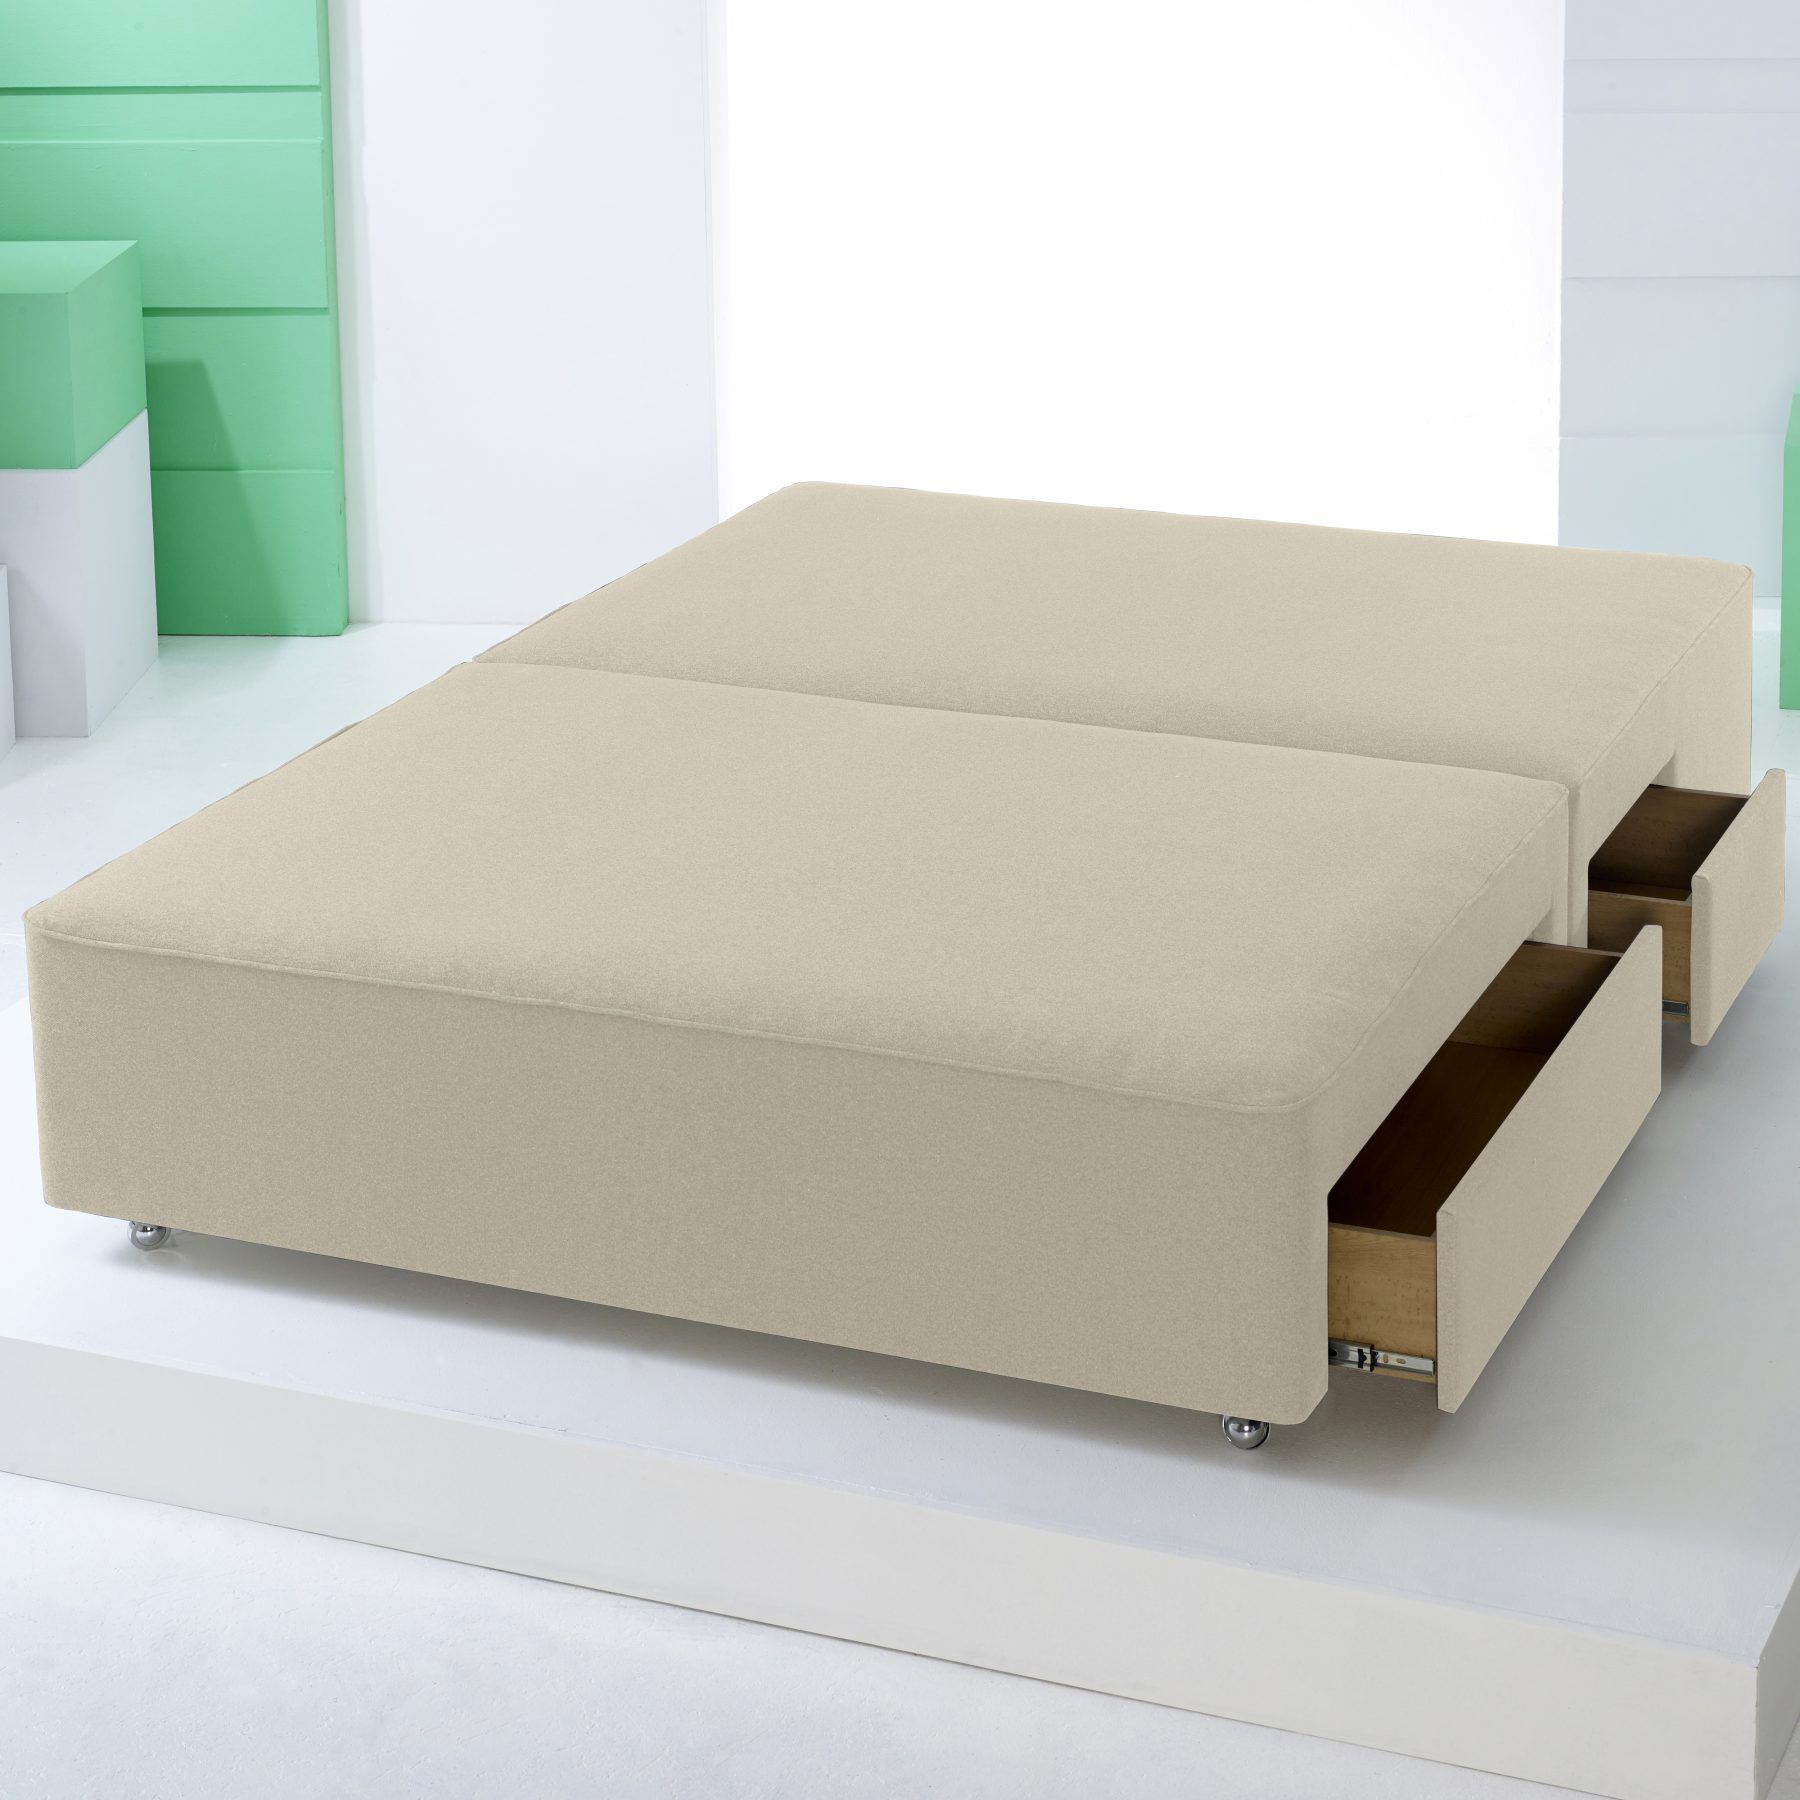 Restful mattresses Taylor-Fitch-2496246399-RT-CO-flax-1800x1800